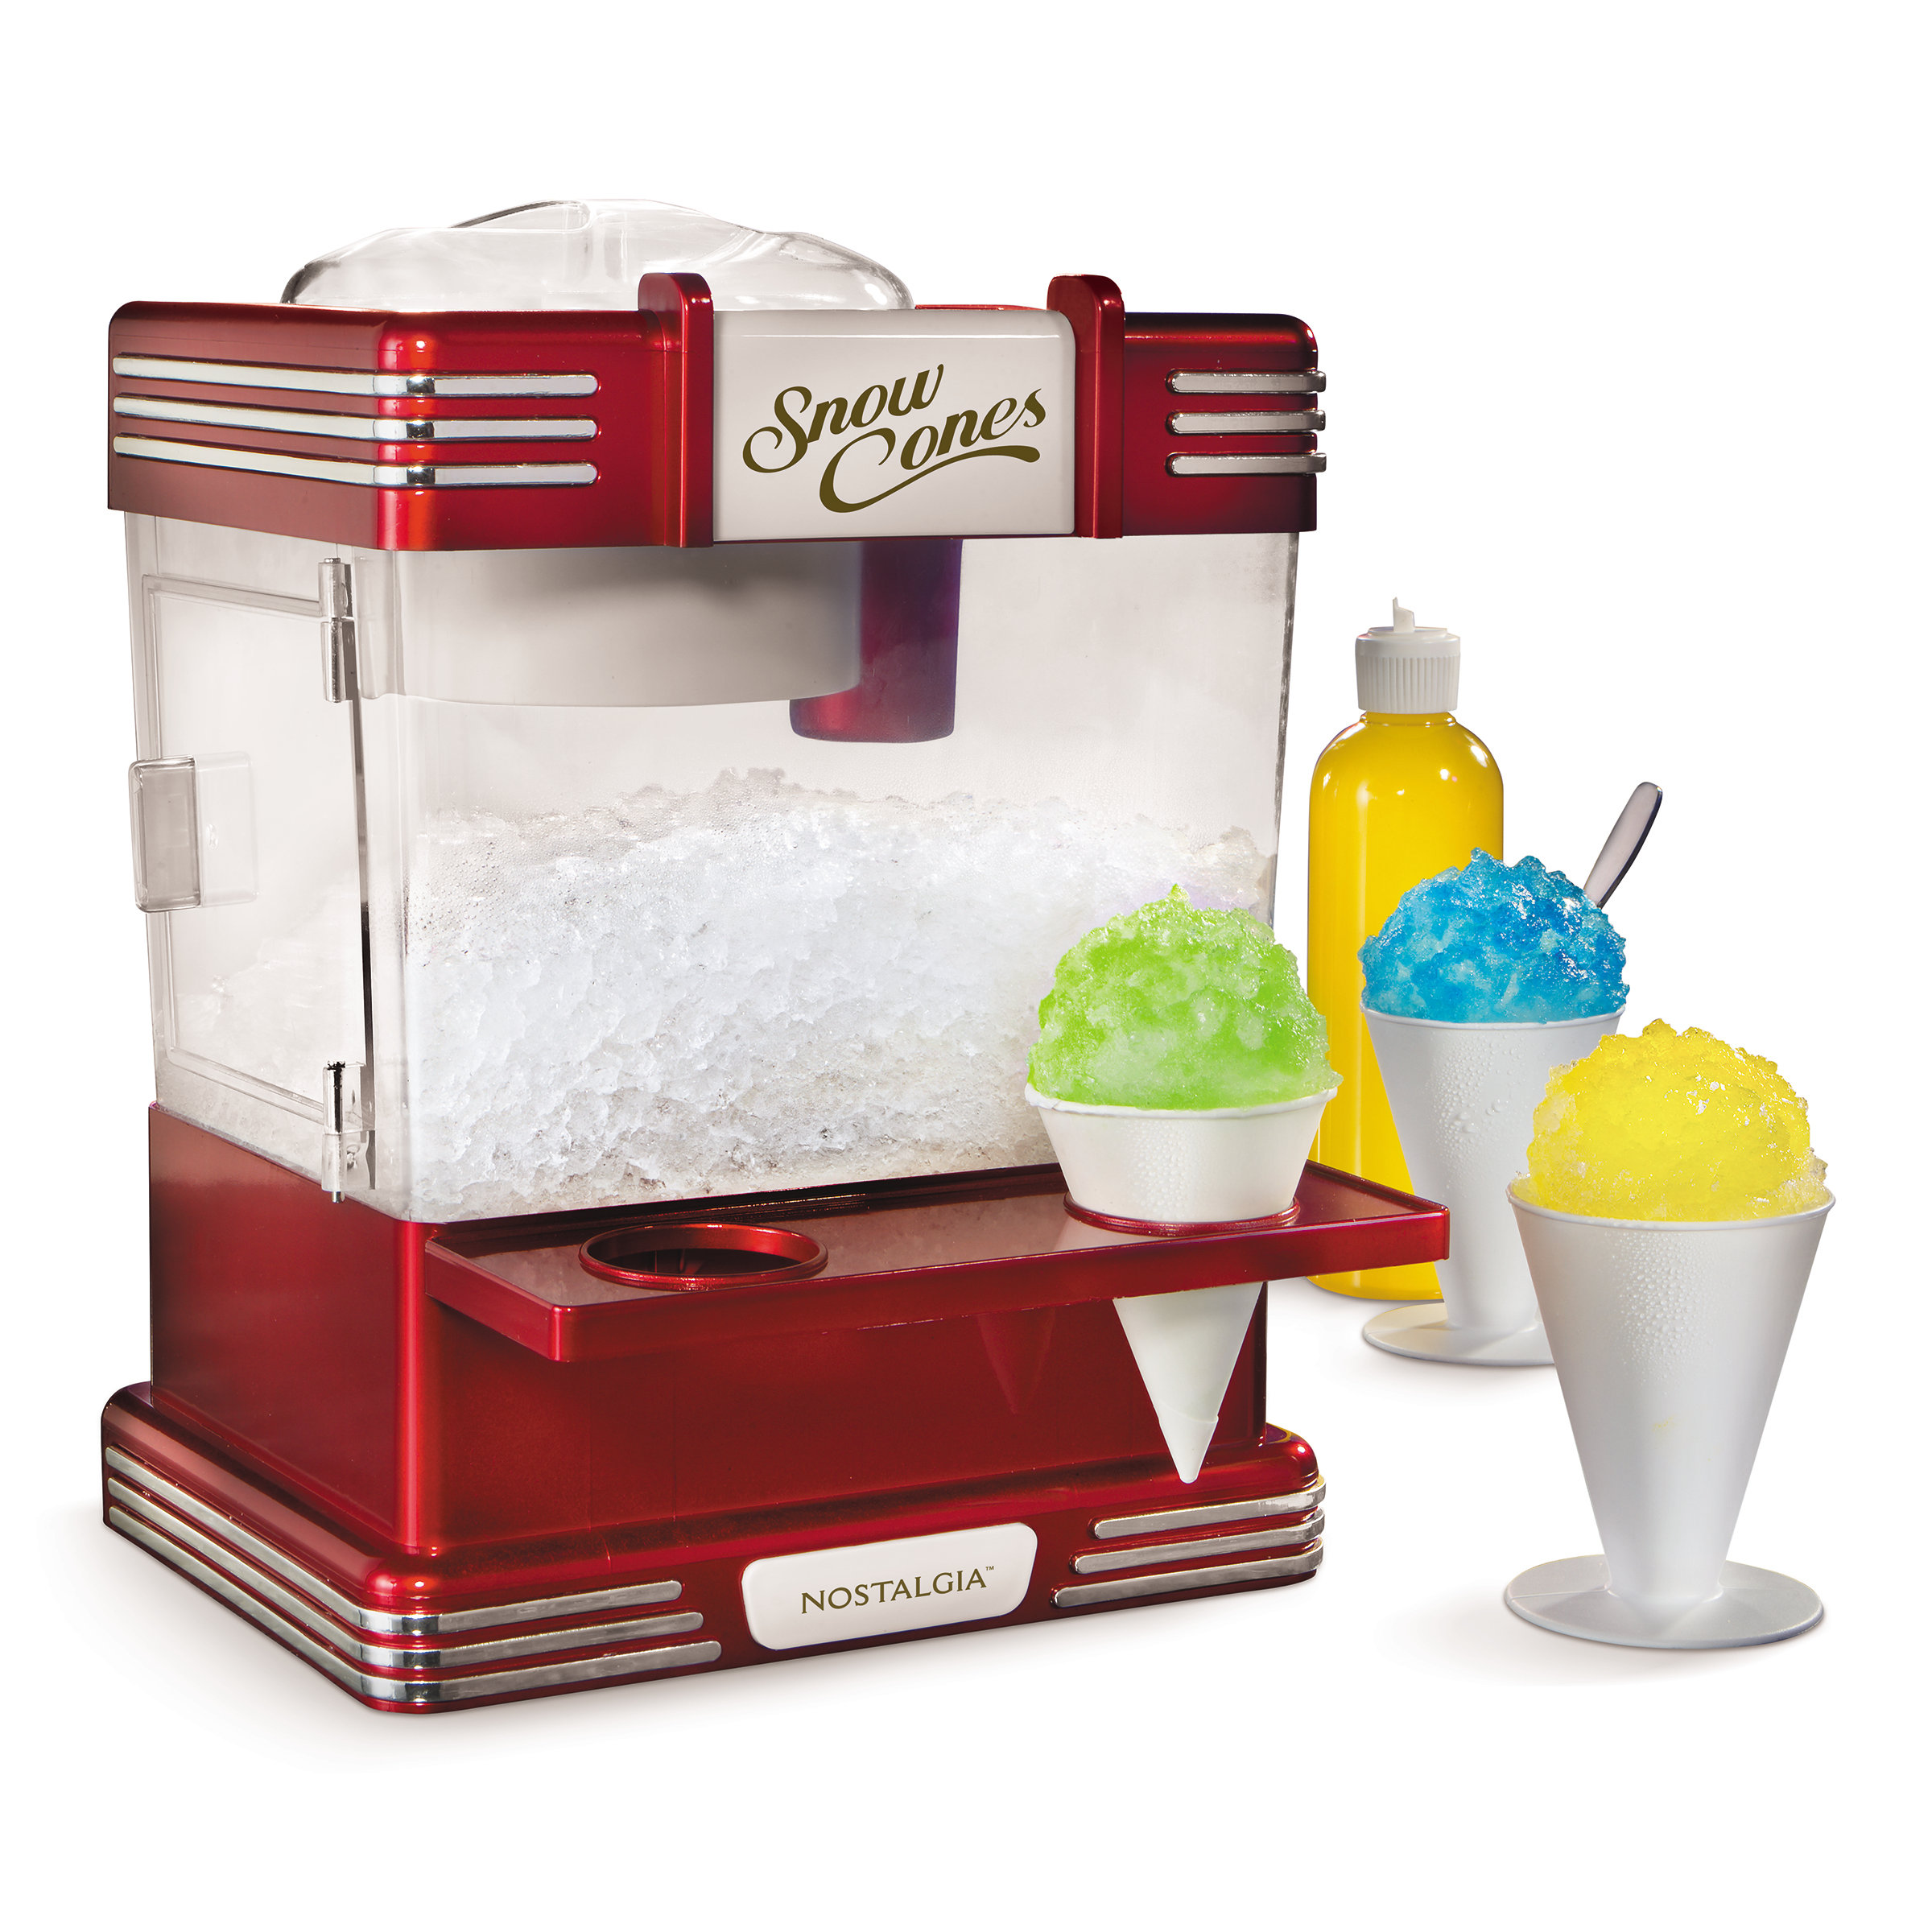 Enjoy fluffy, light-as-snow shave ice with this nifty attachment desig, Shaved Ice